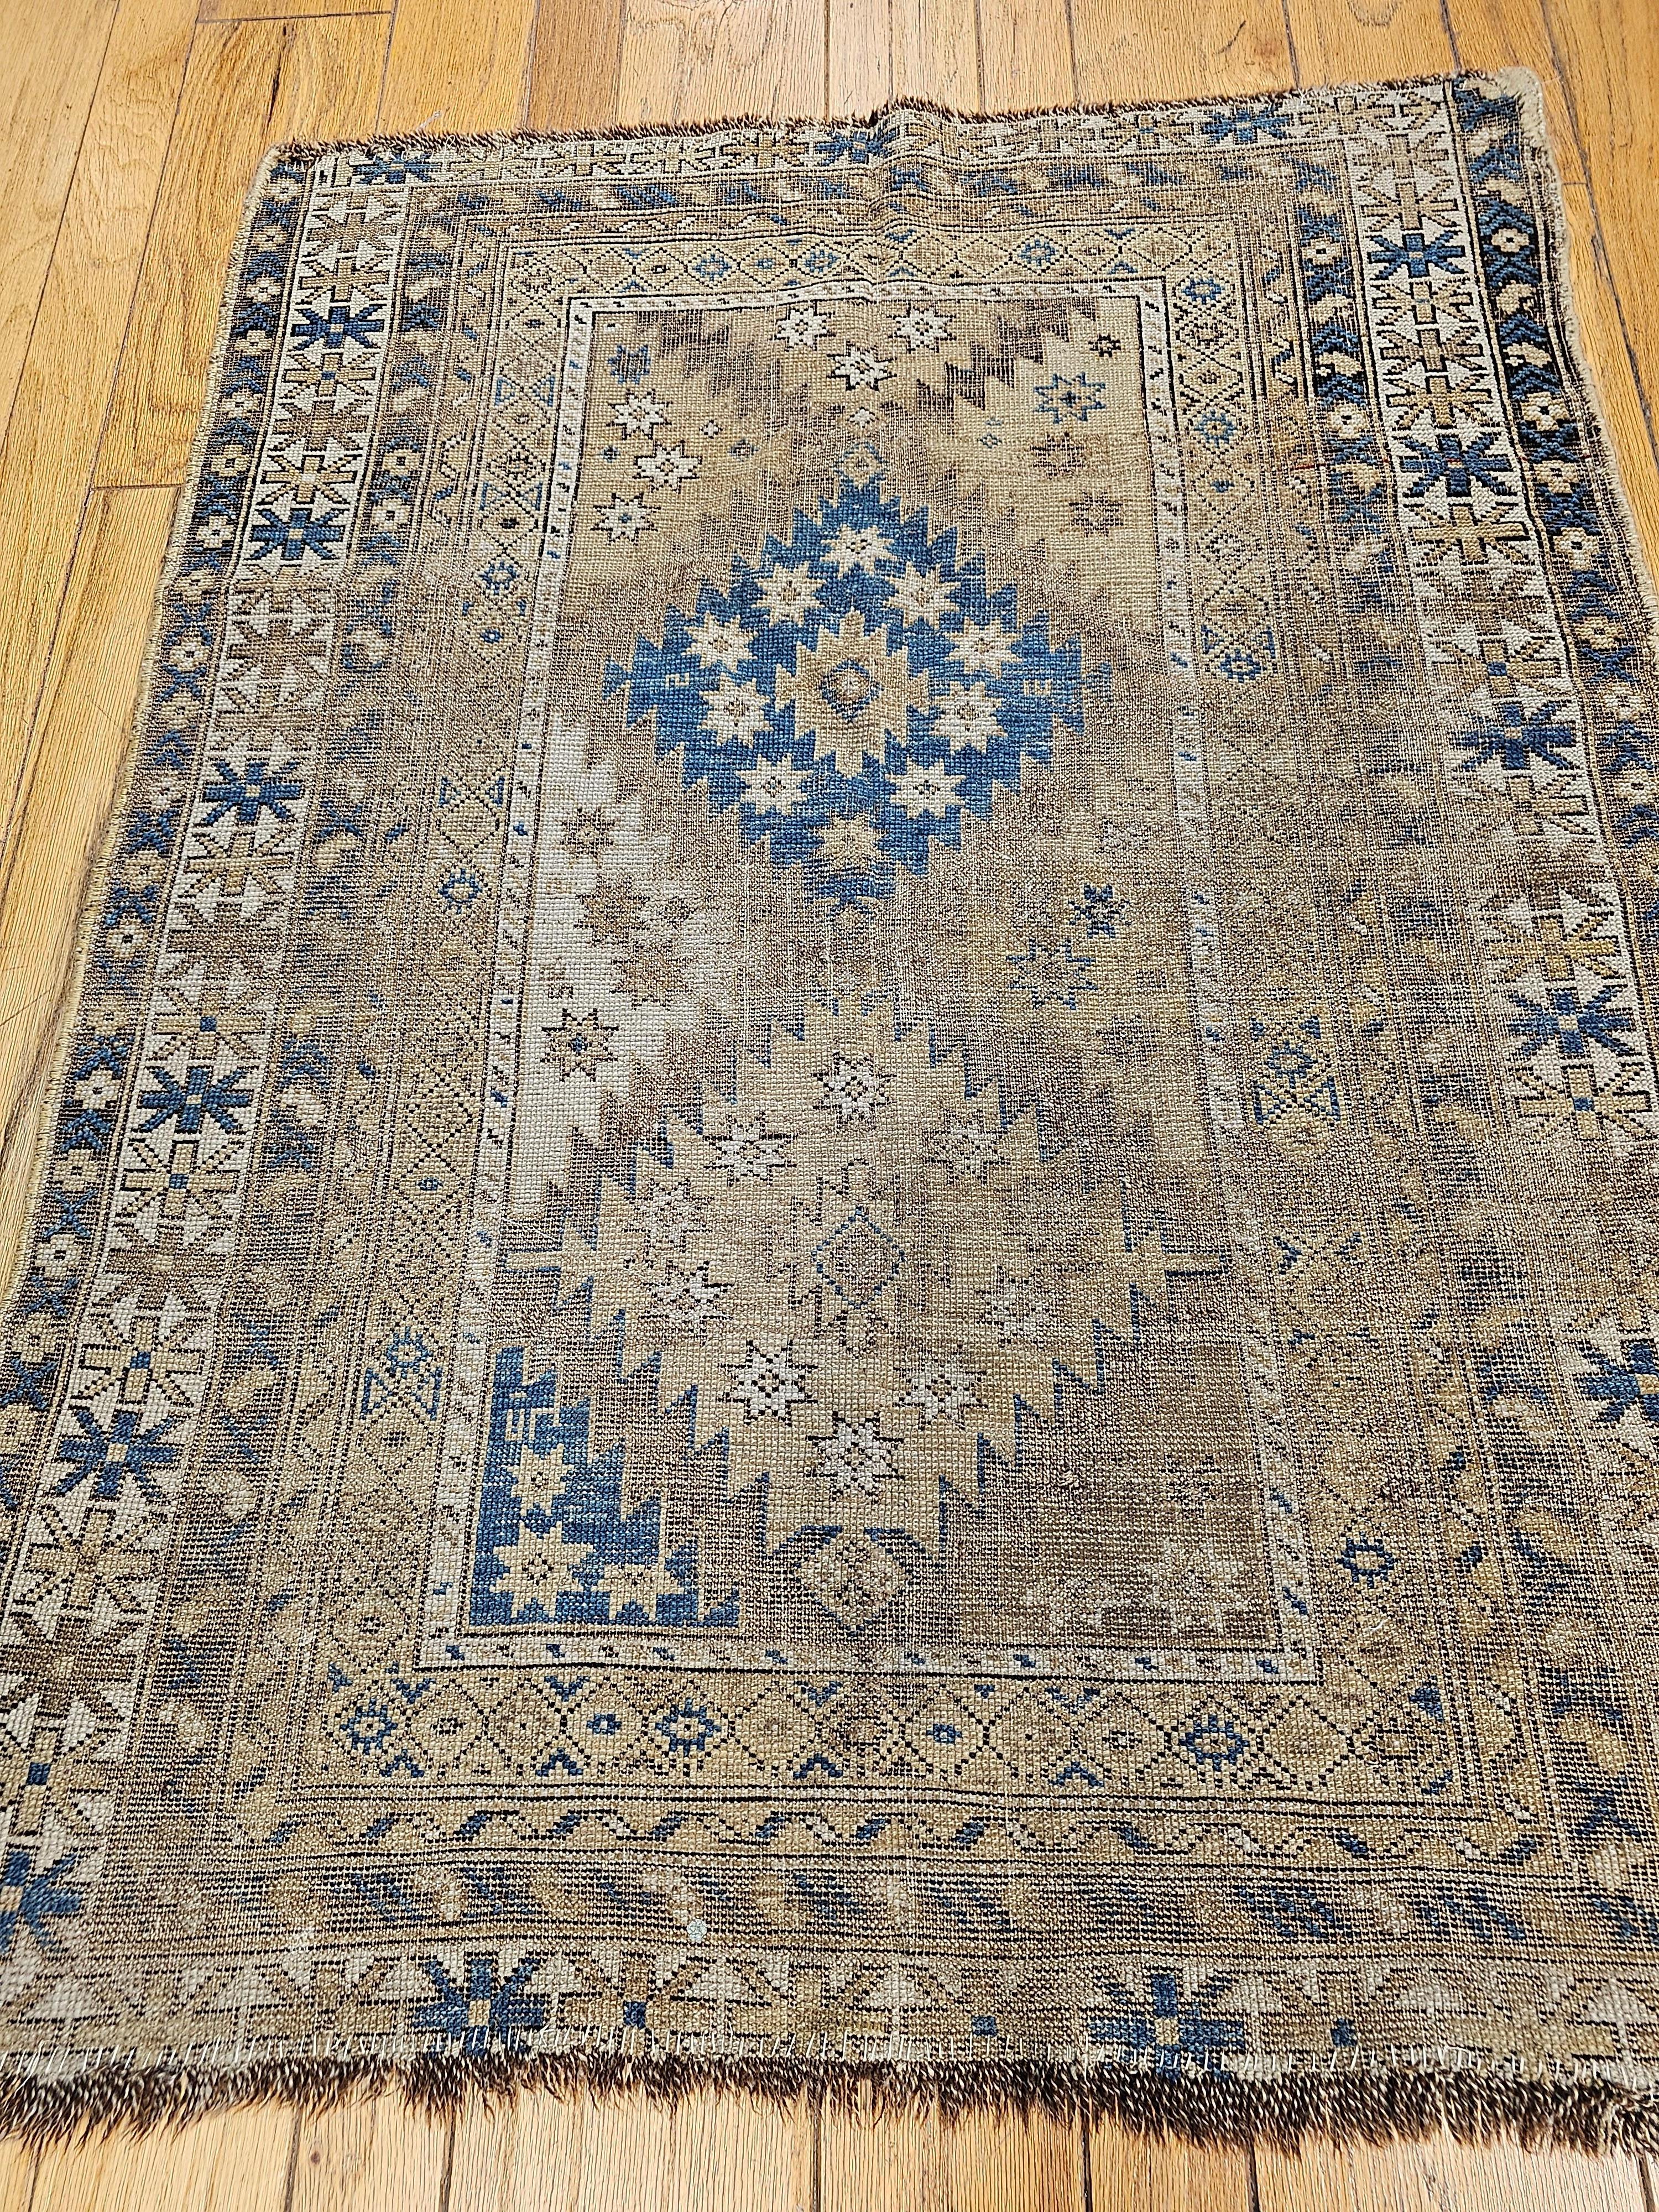 Antique Caucasian Shirvan Rug in Pale French Blue, Ivory and Chocolate Colors.  This beautiful Shirvan village area rug was woven in the Azerbaijan region of the southern Caucasus.  The Shirvan area rug has a triple medallion design in earth tones